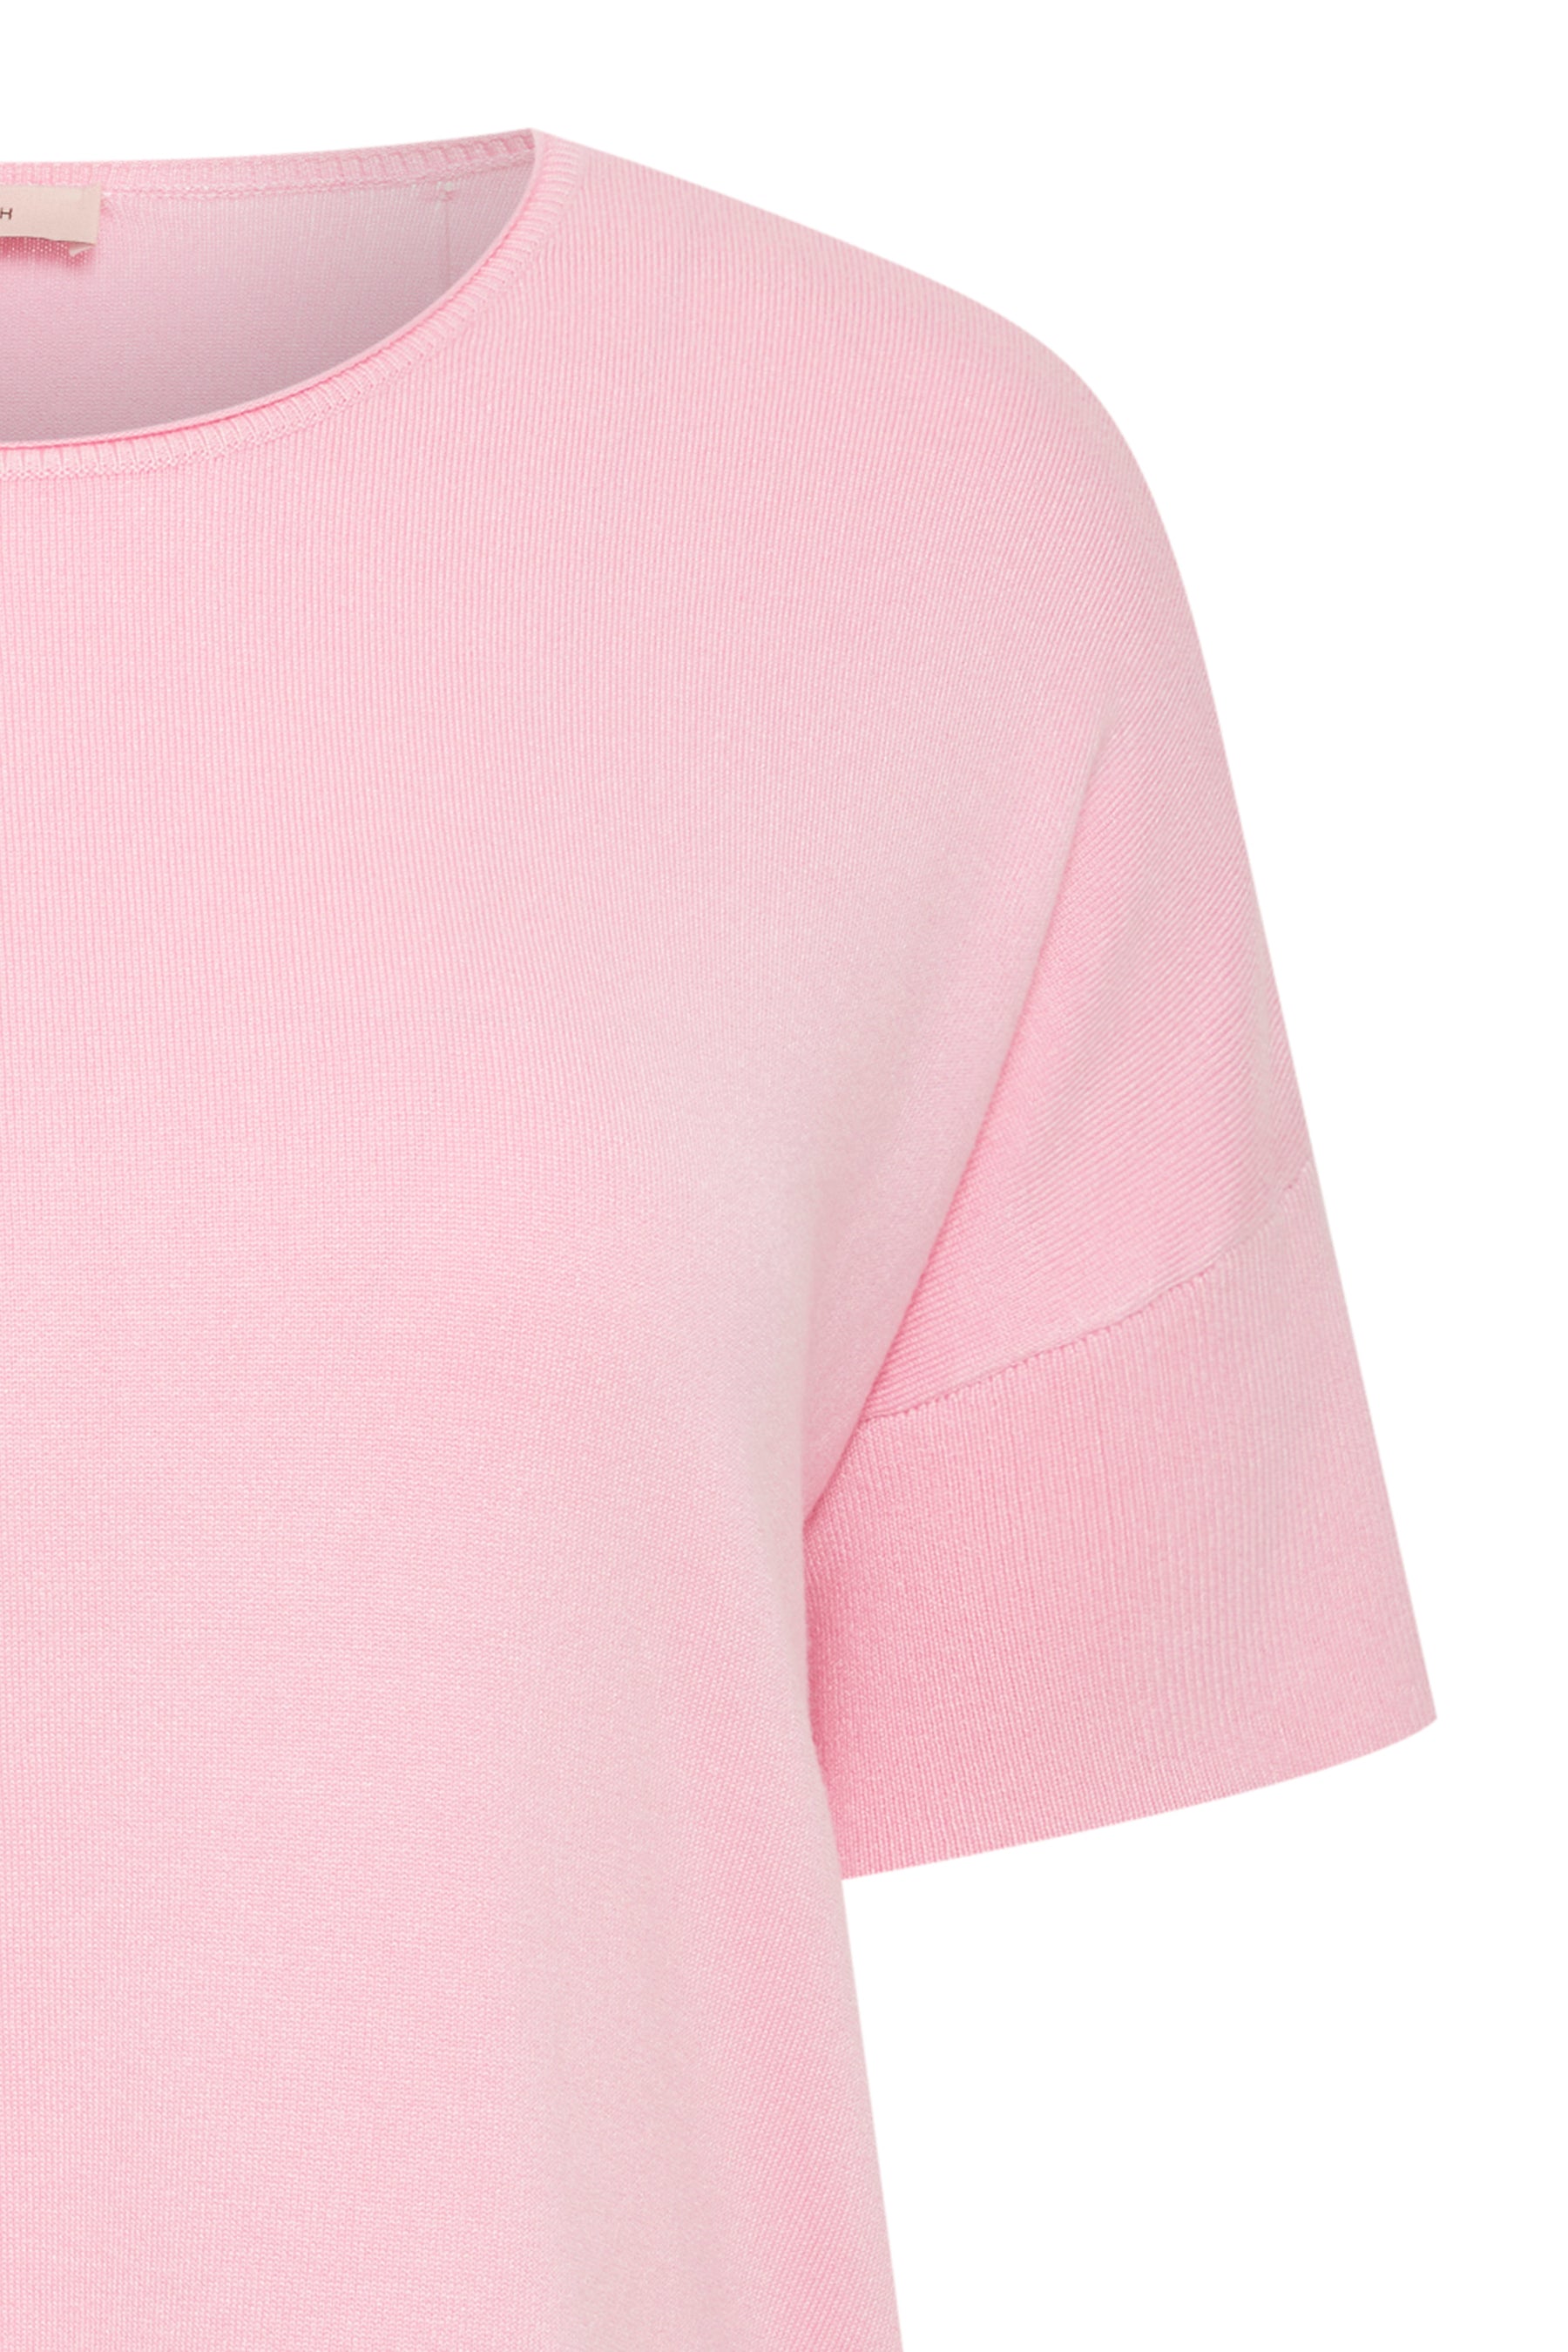 Simple Wish Clia Knitted Top in Pink